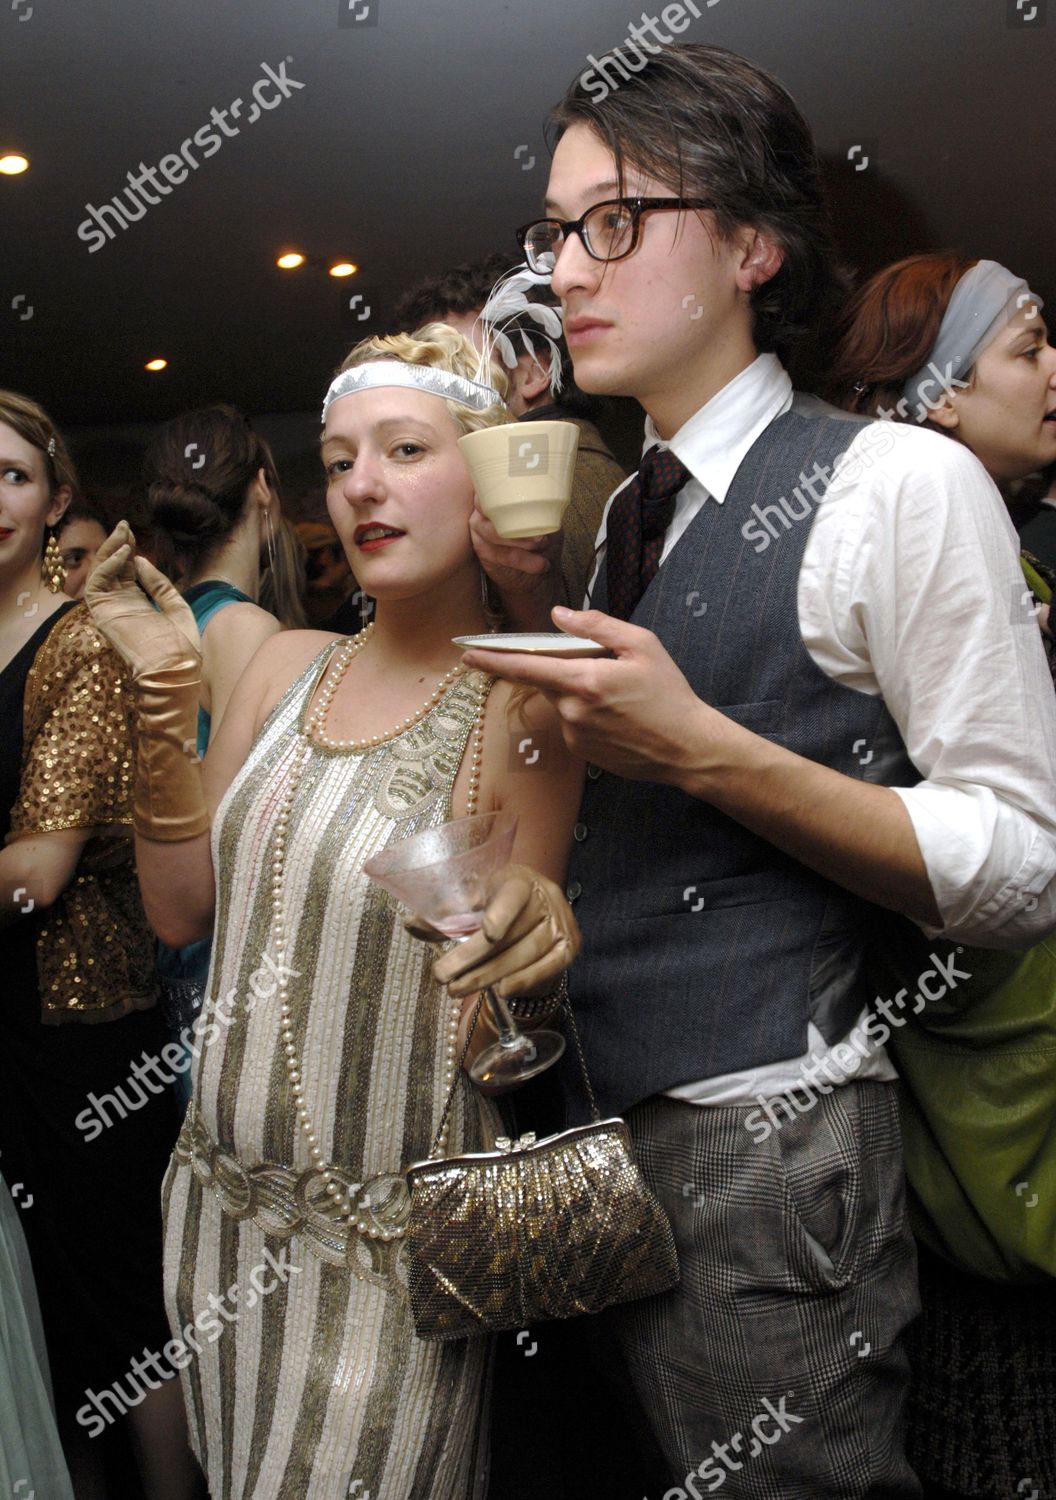 1930s party